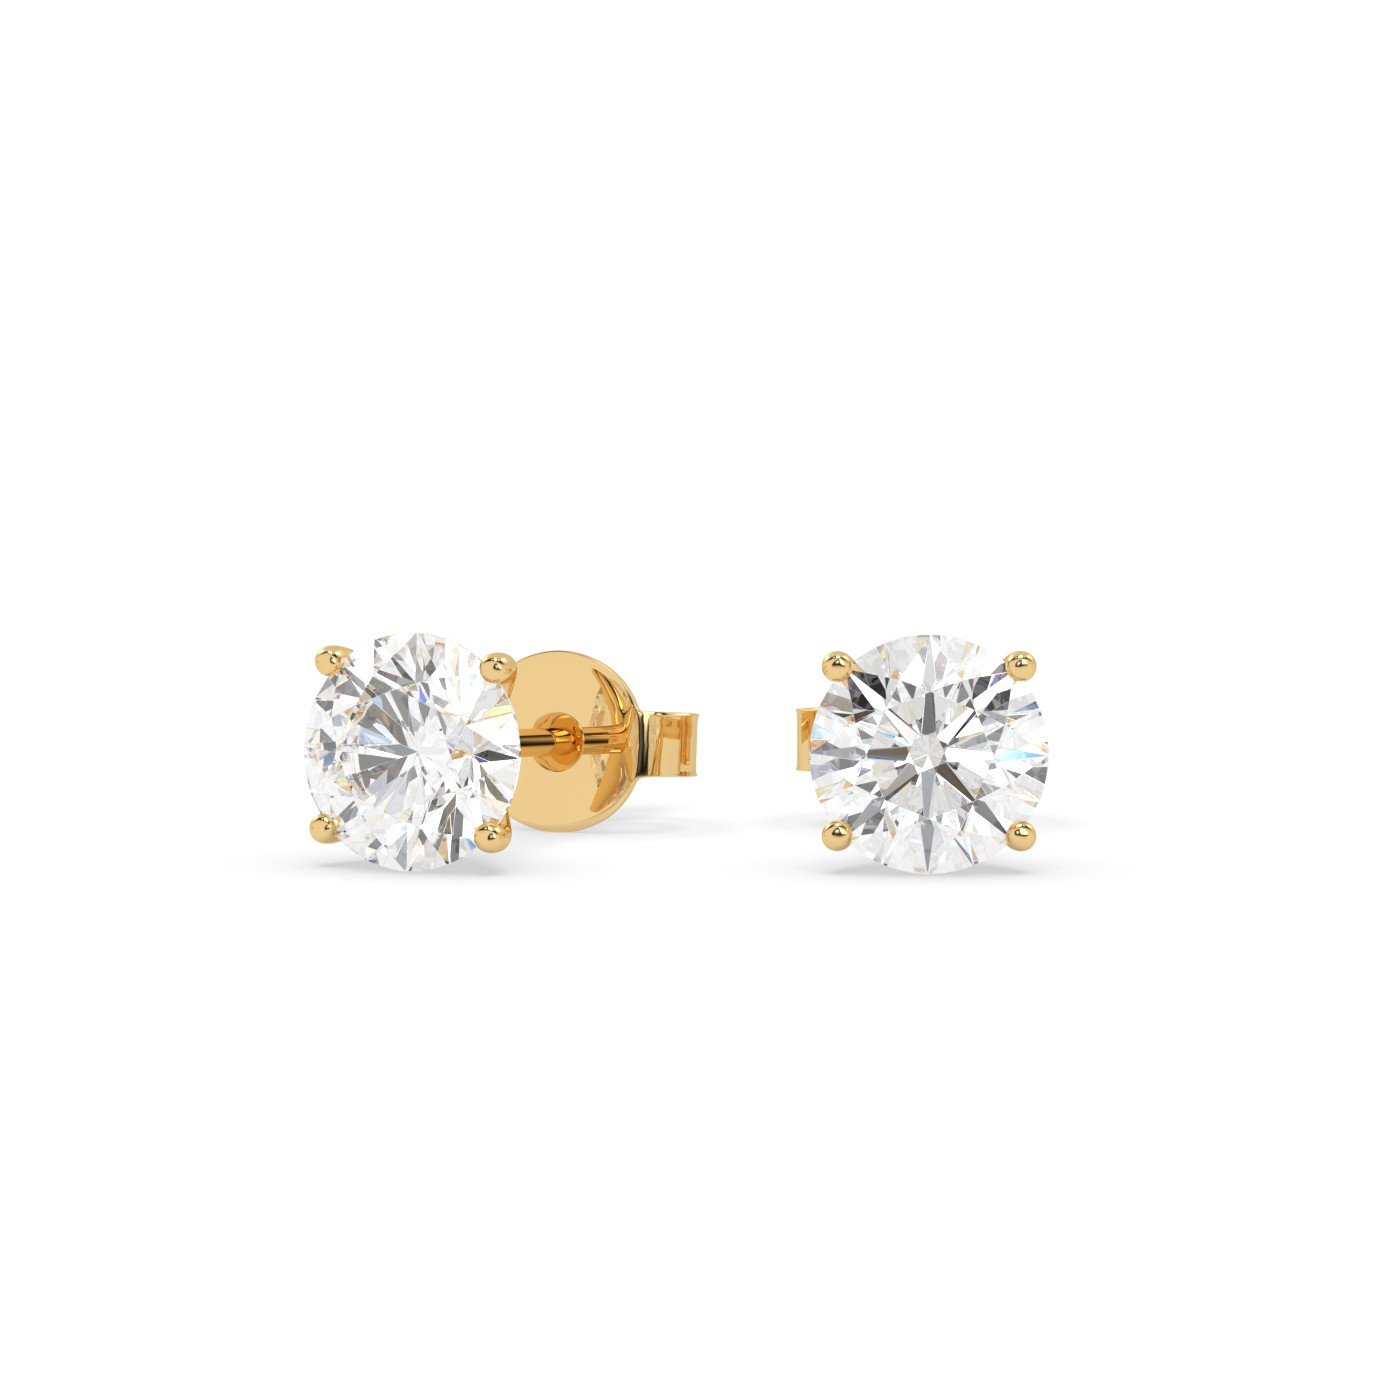 18k yellow gold  1.0 carat round stud earrings with butterfly back